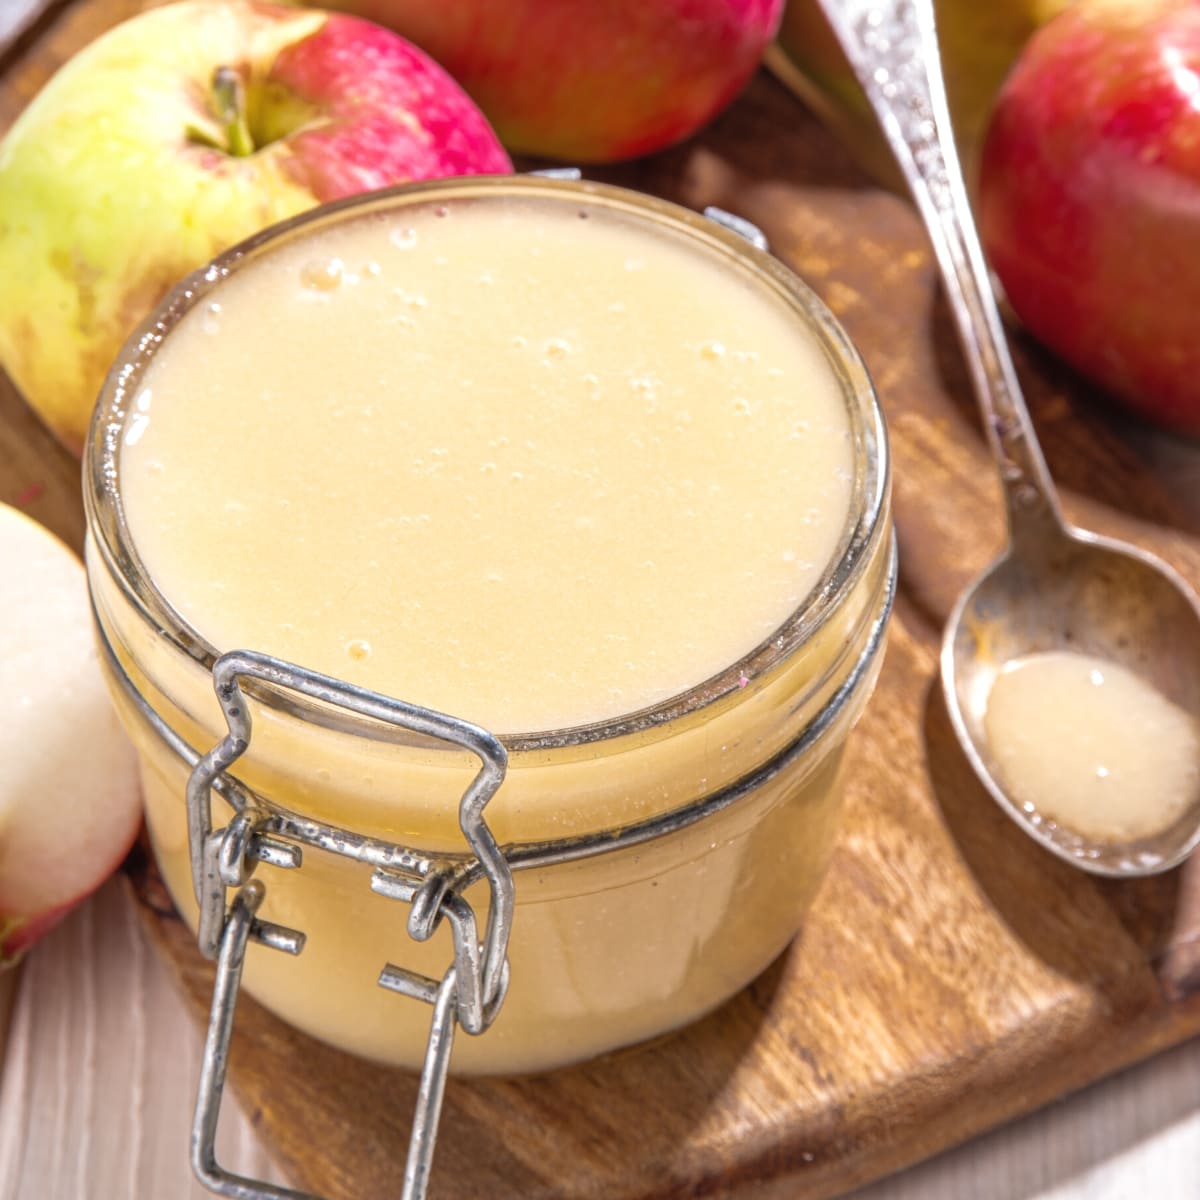 A clear glass jar filled with apple sauce.